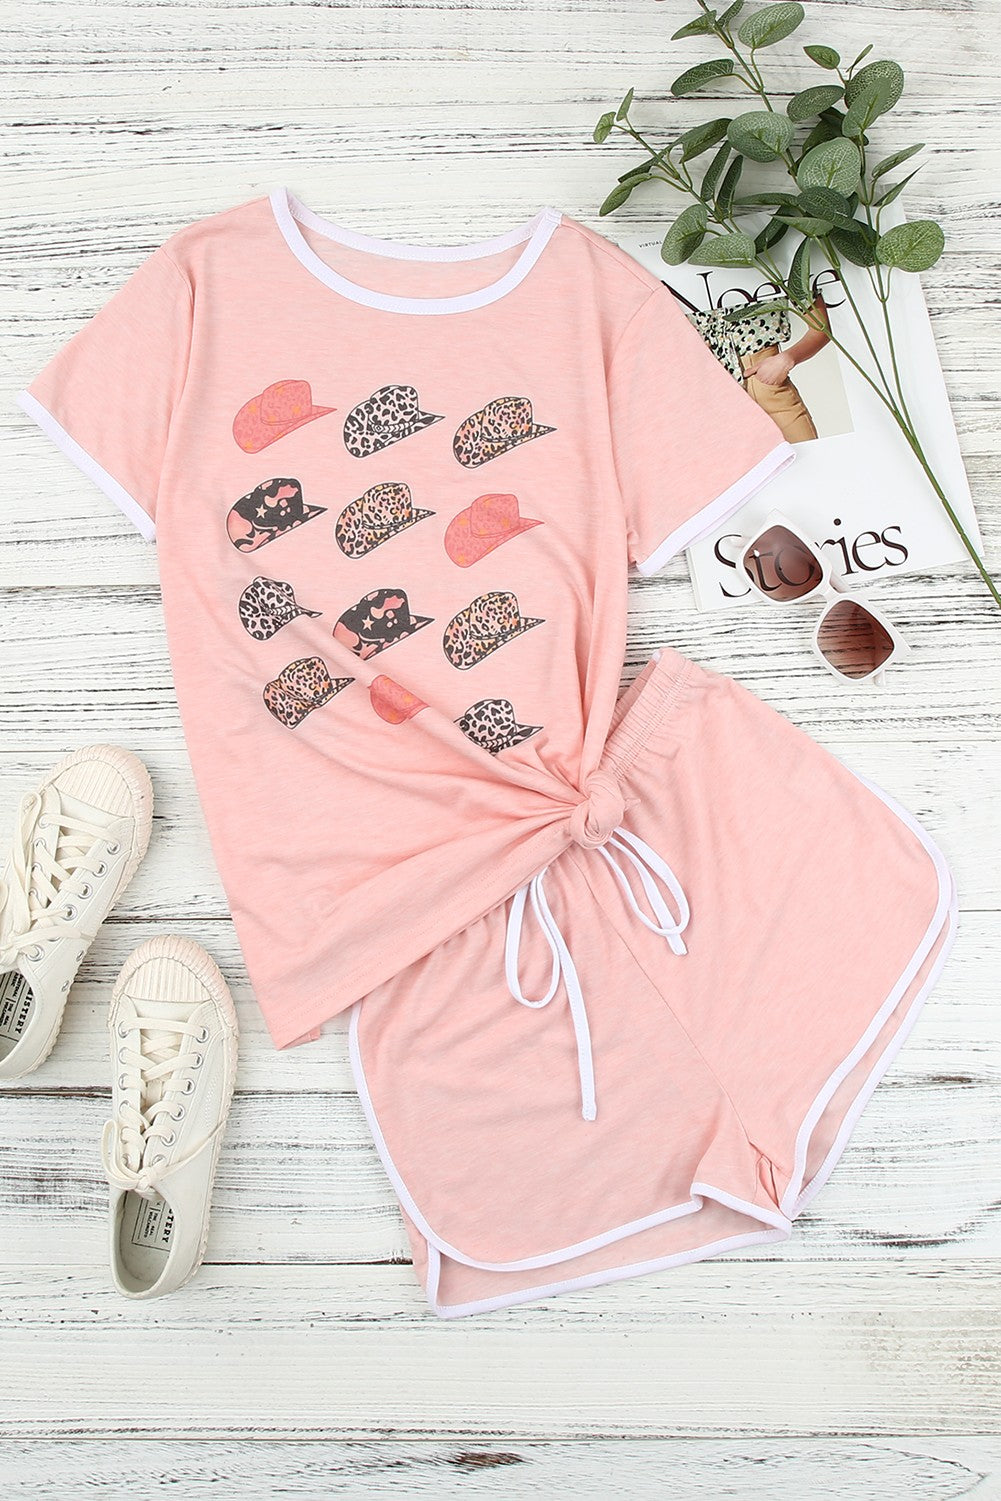 Graphic Tee and Drawstring Shorts Loungewear Set - Pink / S Apparel & Accessories Wynter 4 All Seasons